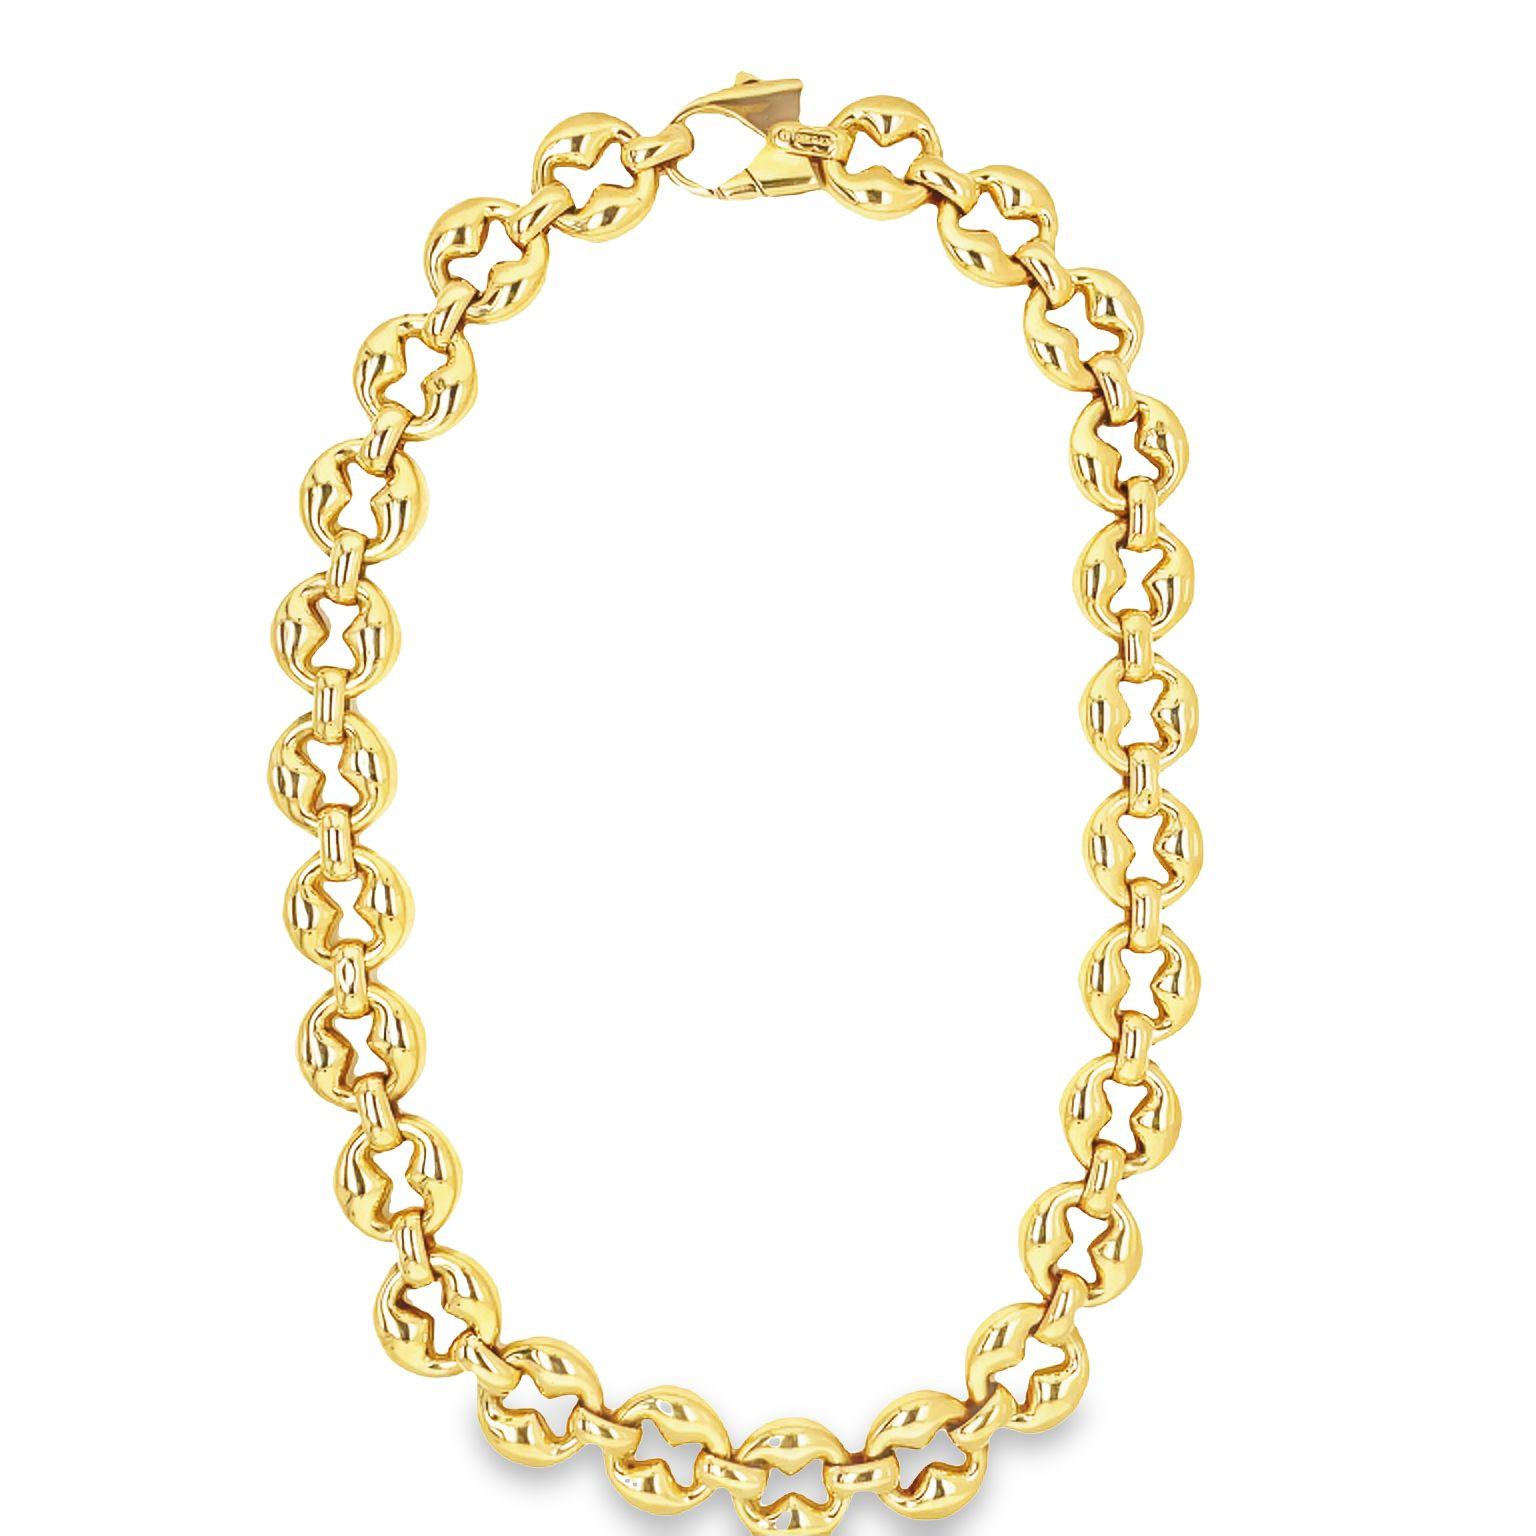 A beautifully rendered mariners link necklace in gleaming 18 karat yellow gold by the distinguished Italian goldsmith company, UNOAERRE. Composed of twenty-five “puffed” mariners links and completed by a modernized lobster claw clasp, this